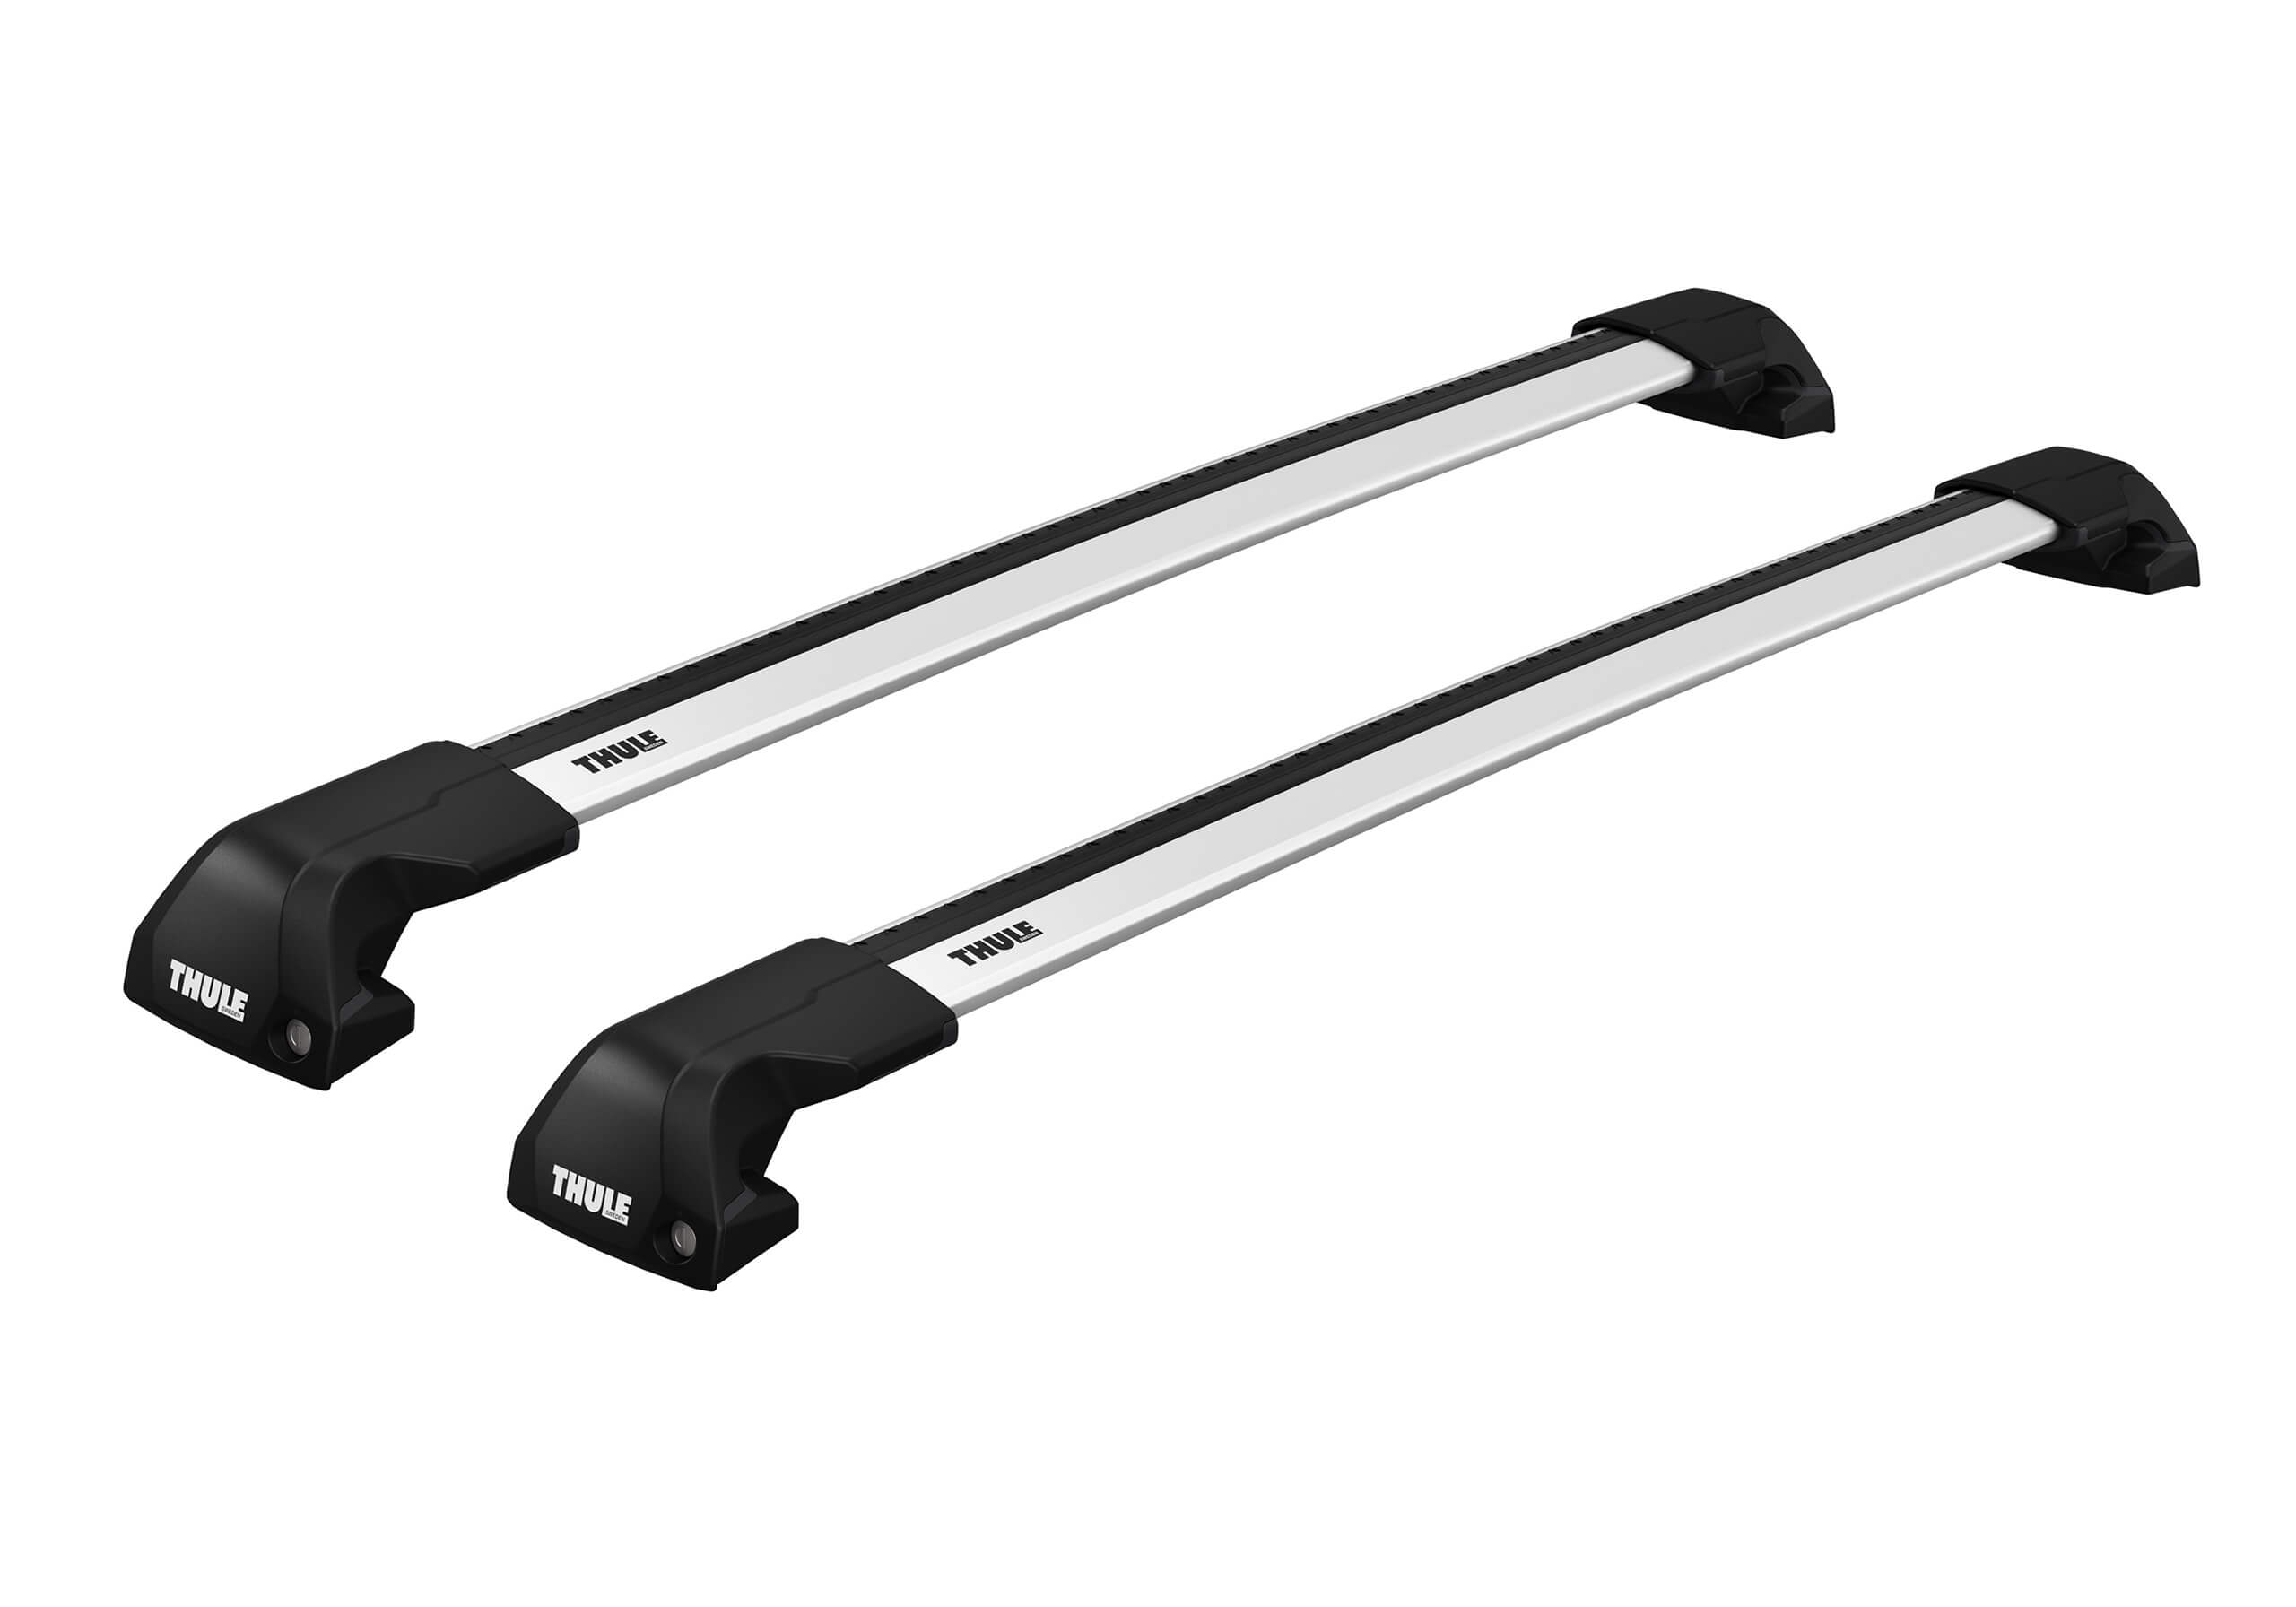 Audi Q3 (2011 to 2019):Thule Edge silver WingBars package - 7206, 7214, 7213, 6031